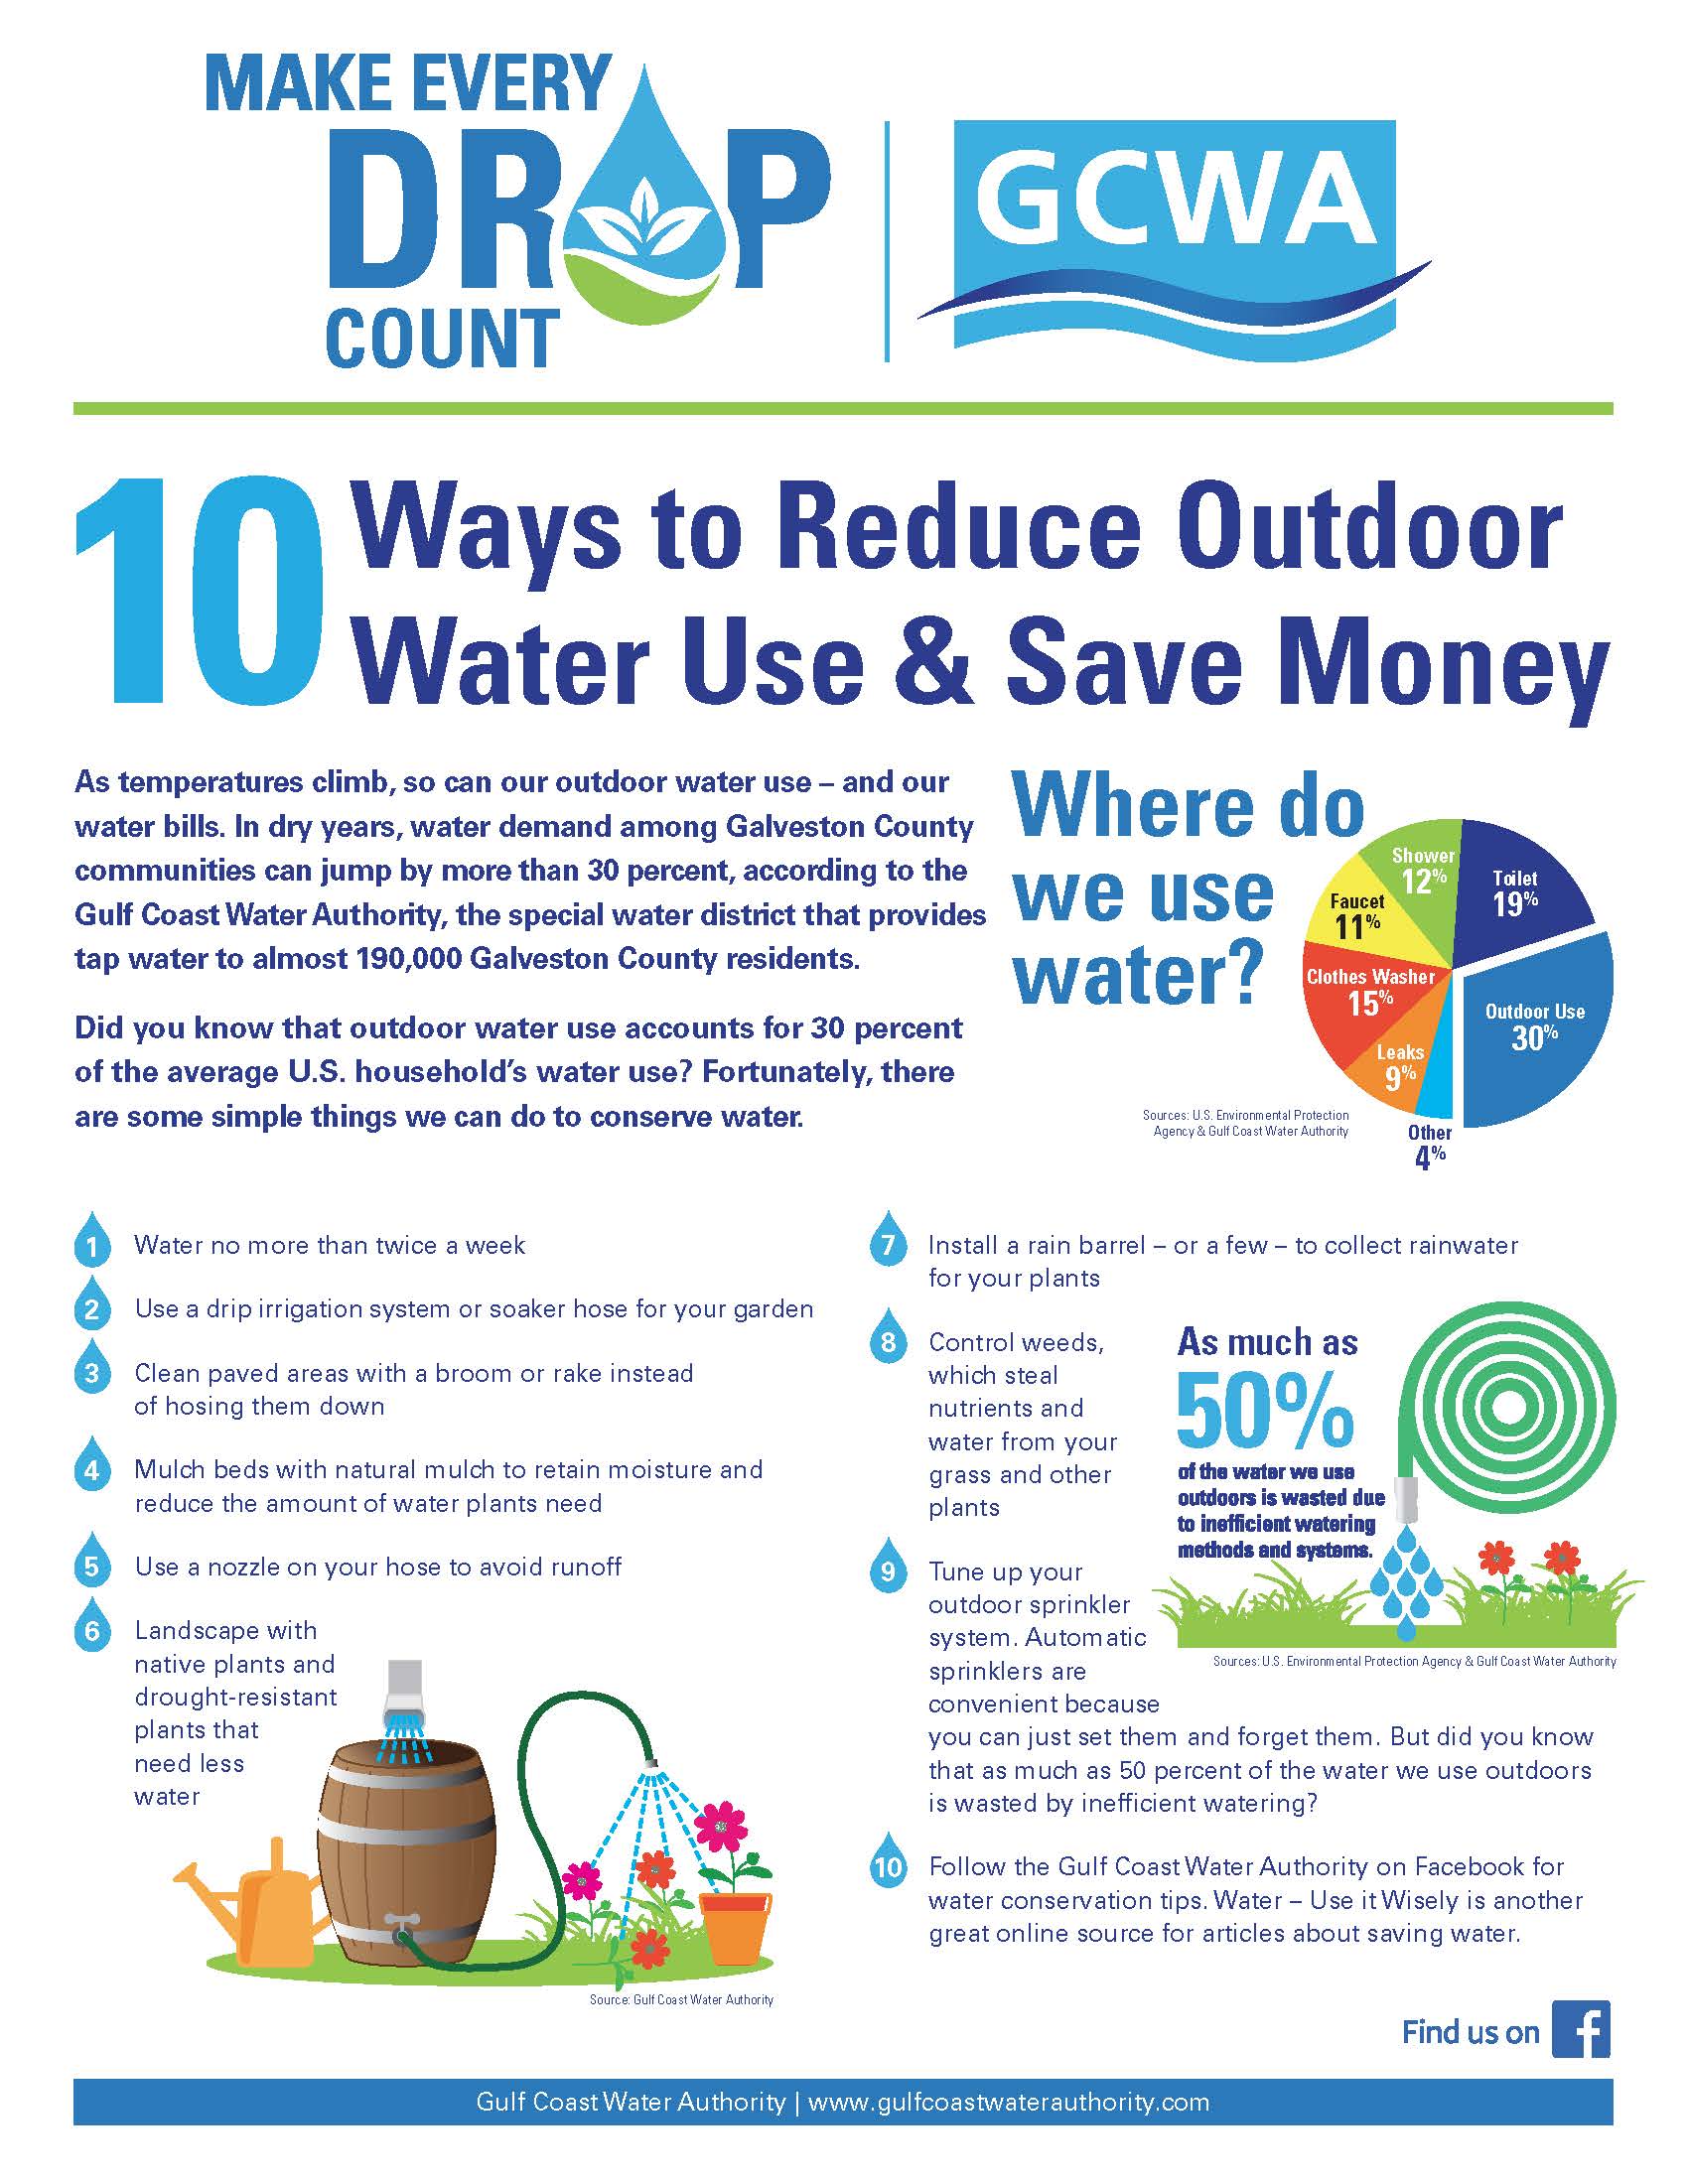 Ten Tips to Conserve Water